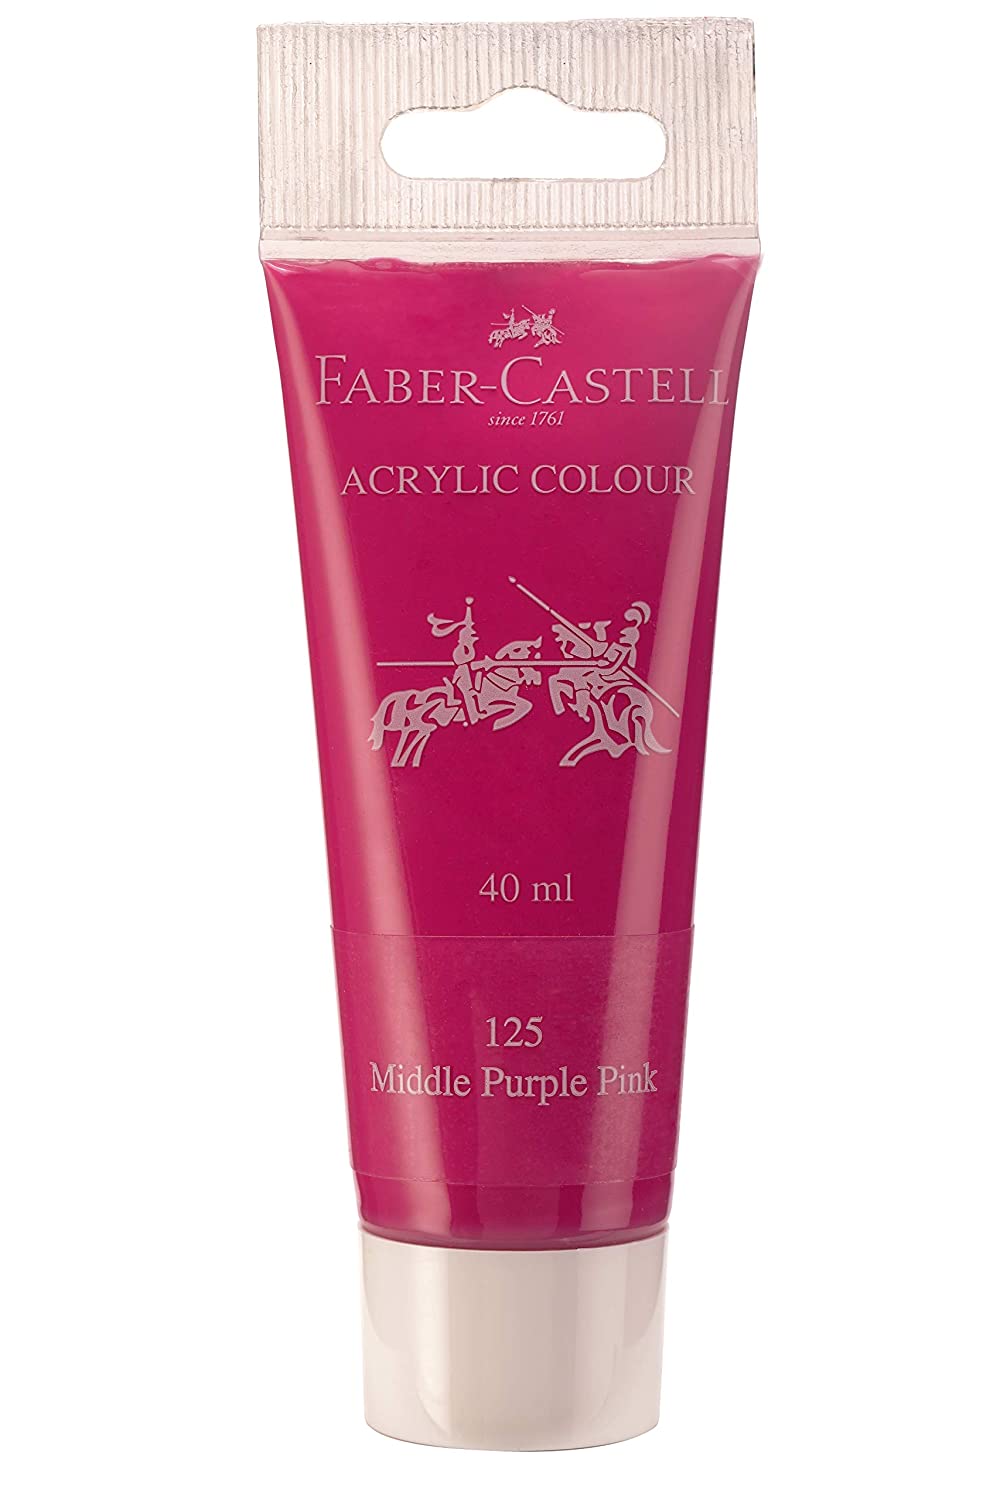 Faber-Castell Acrylic 40 ml Tube - Middle Purple Pink 125